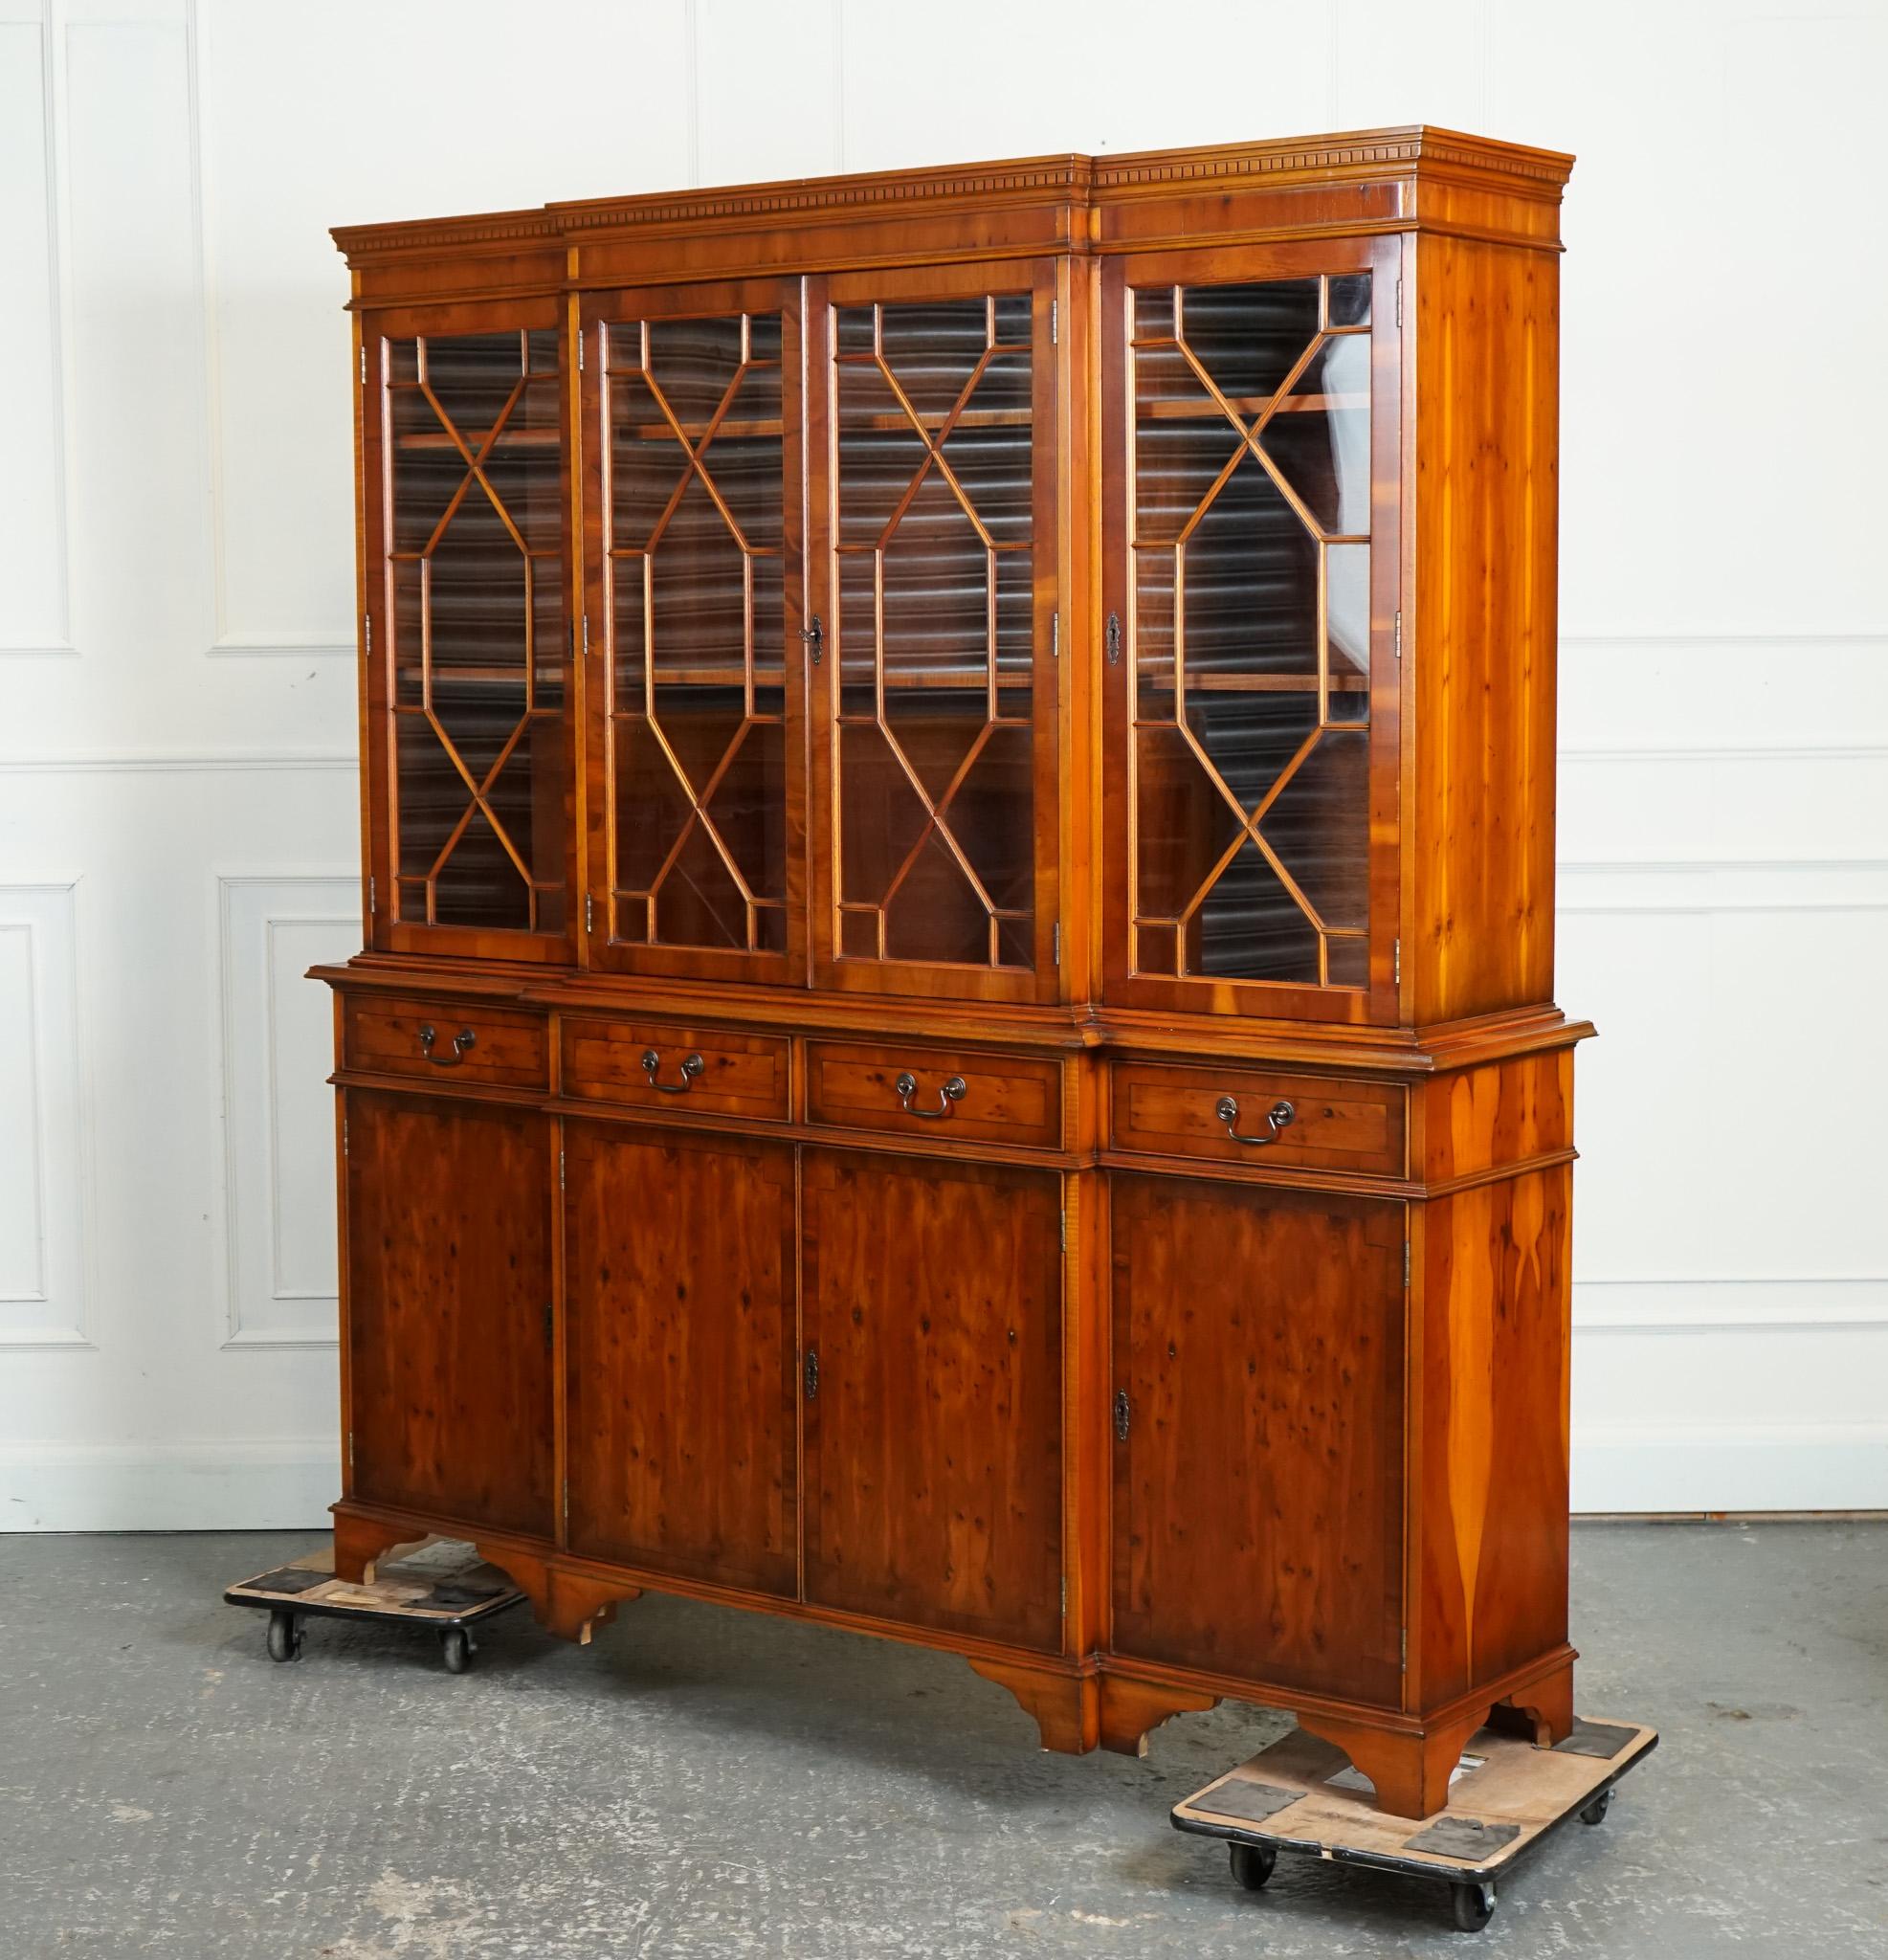 We are delighted to offer for sale this Lovely Vintage Burr Yew Wood Display Cabinet By Charles Barr.

 A luxurious and elegant piece of furniture that showcases the exquisite craftsmanship and timeless design characteristic of Charles Barr